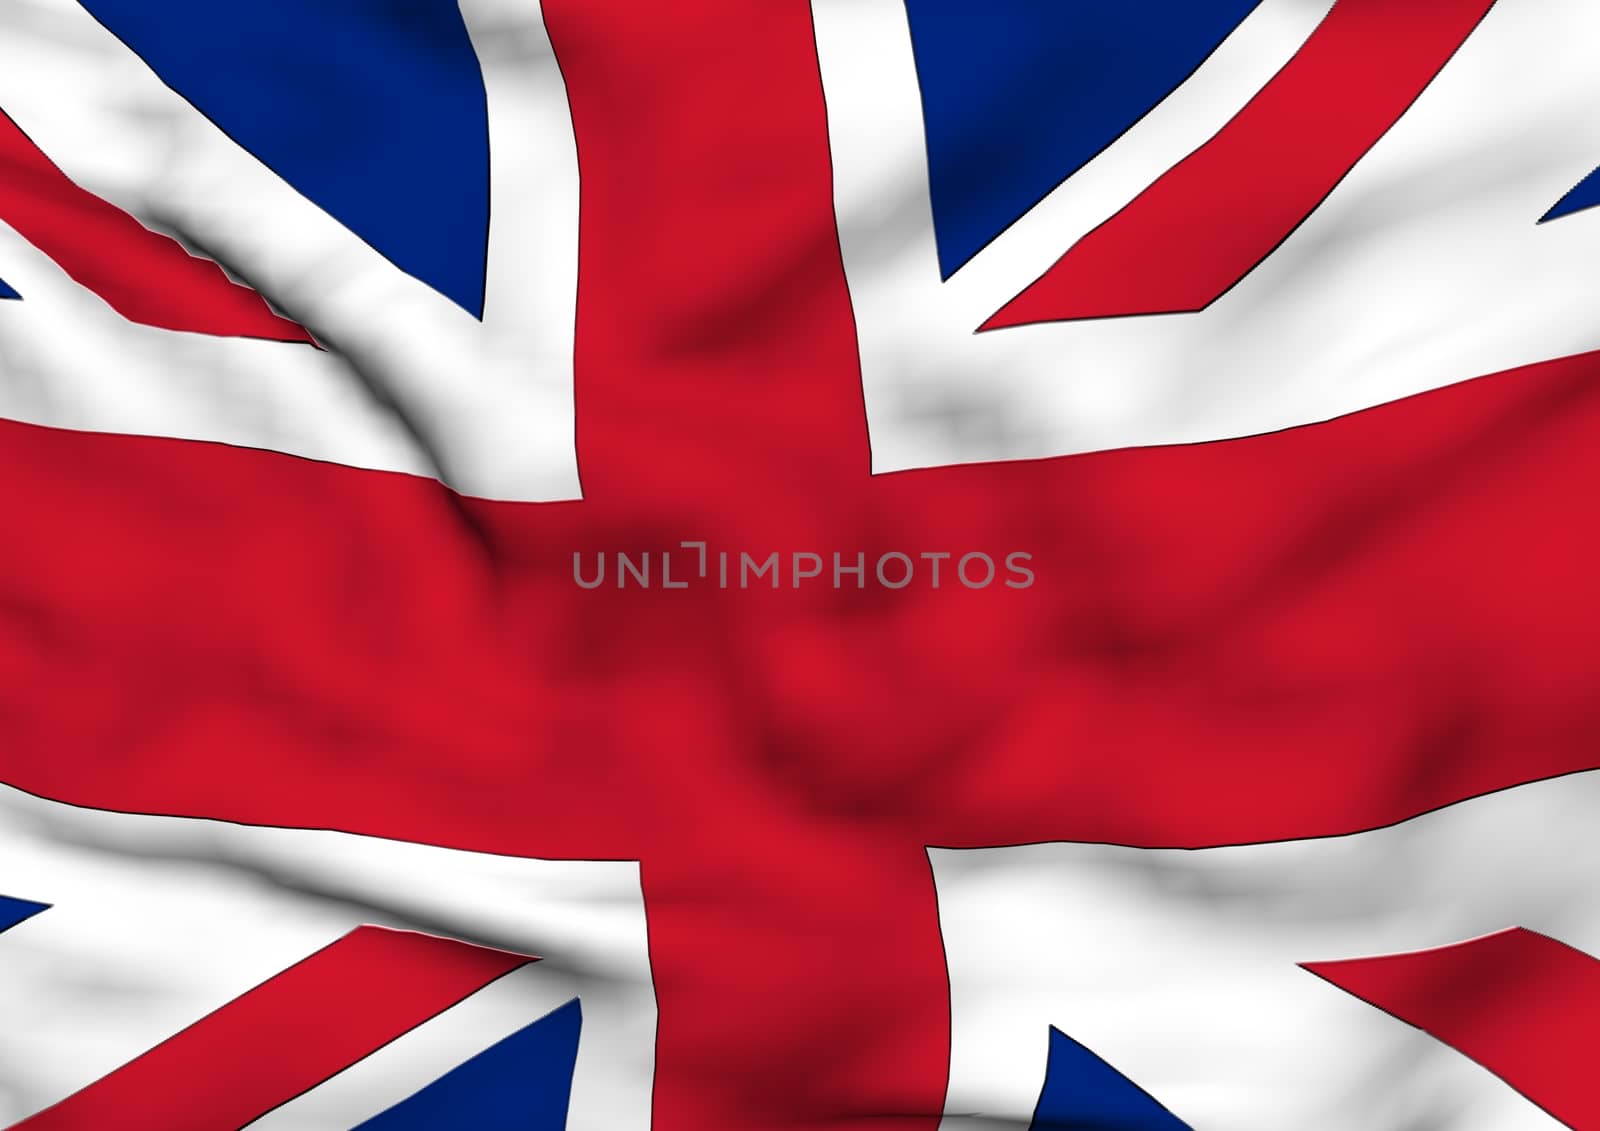 Image of a flag of UK by richter1910